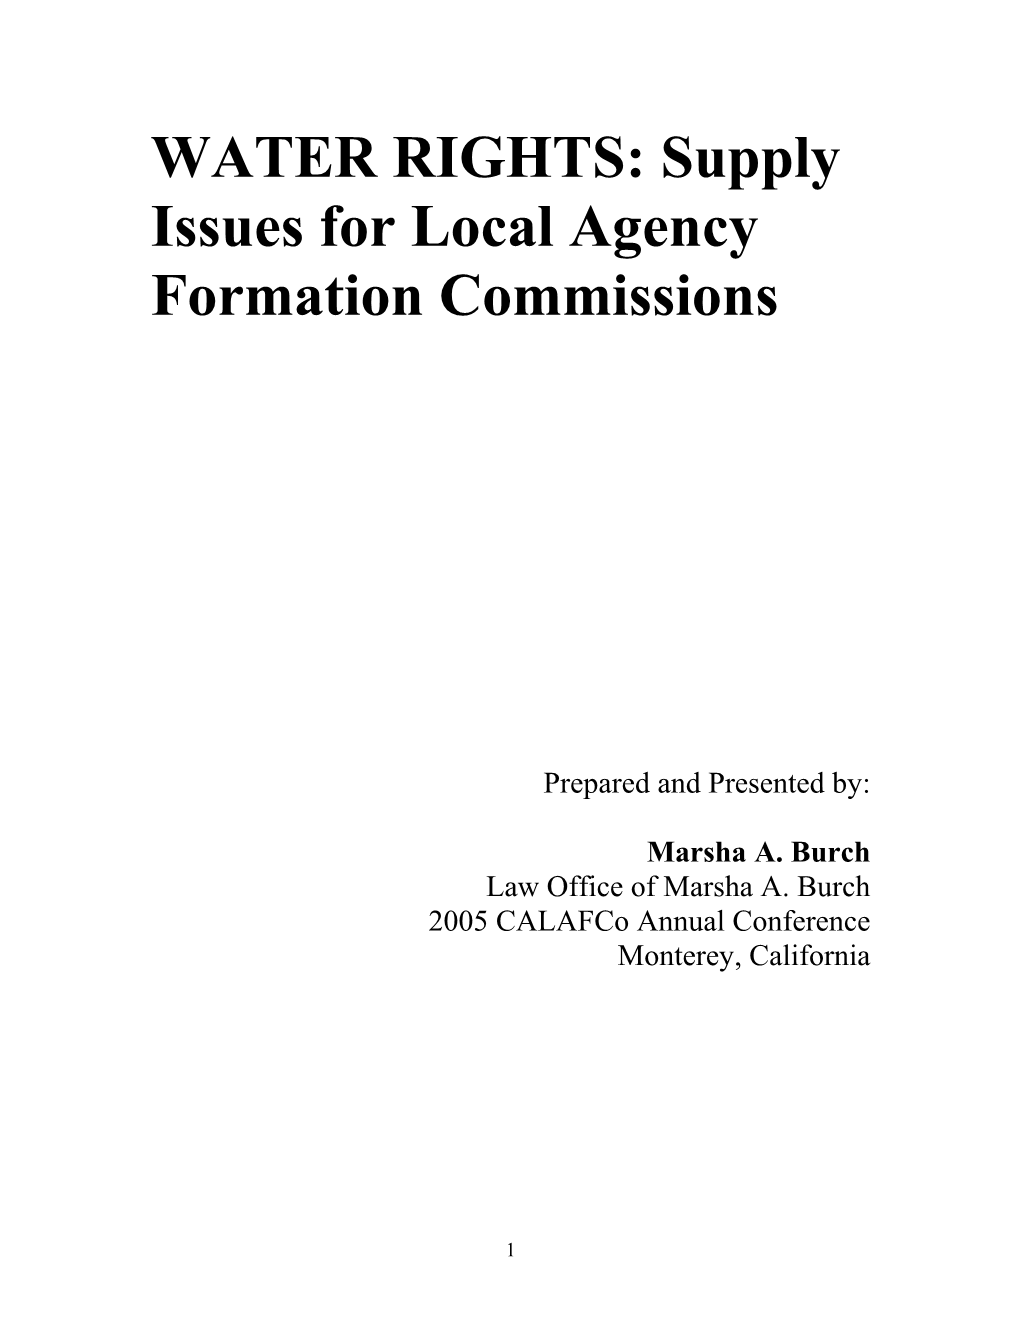 WATER RIGHTS: Supply Issues for Local Agency Formation Commissions